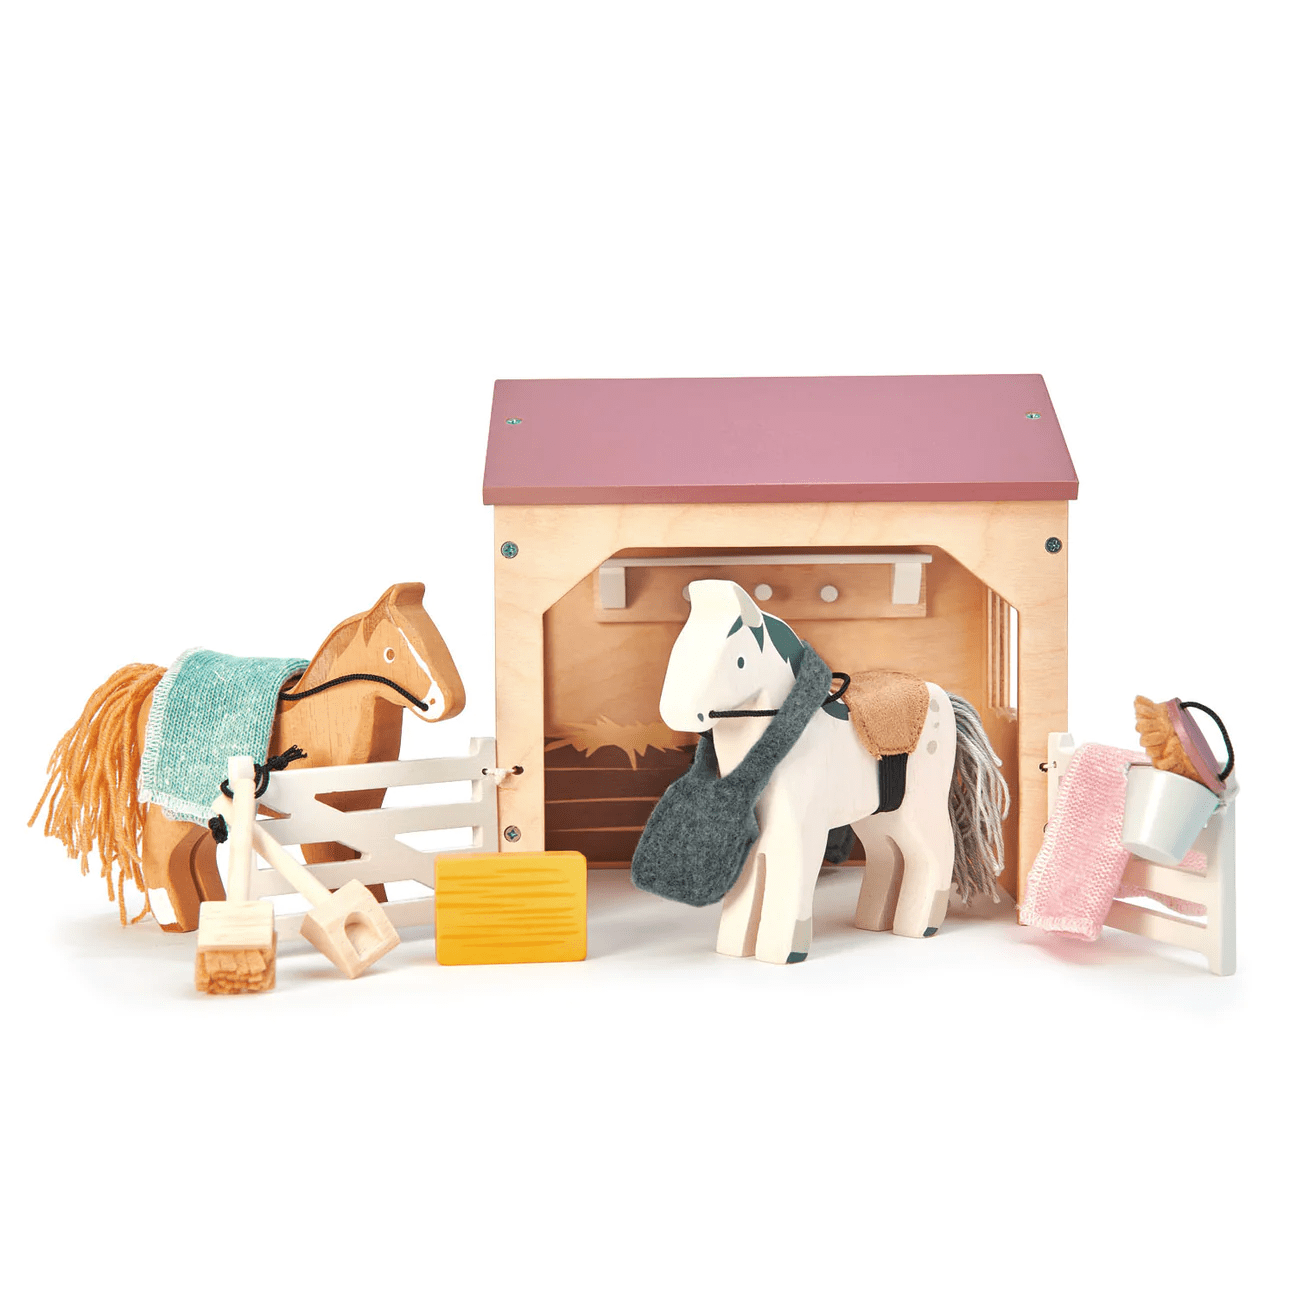 The Stables | Tender Leaf Toys | Iris Gifts & Décor